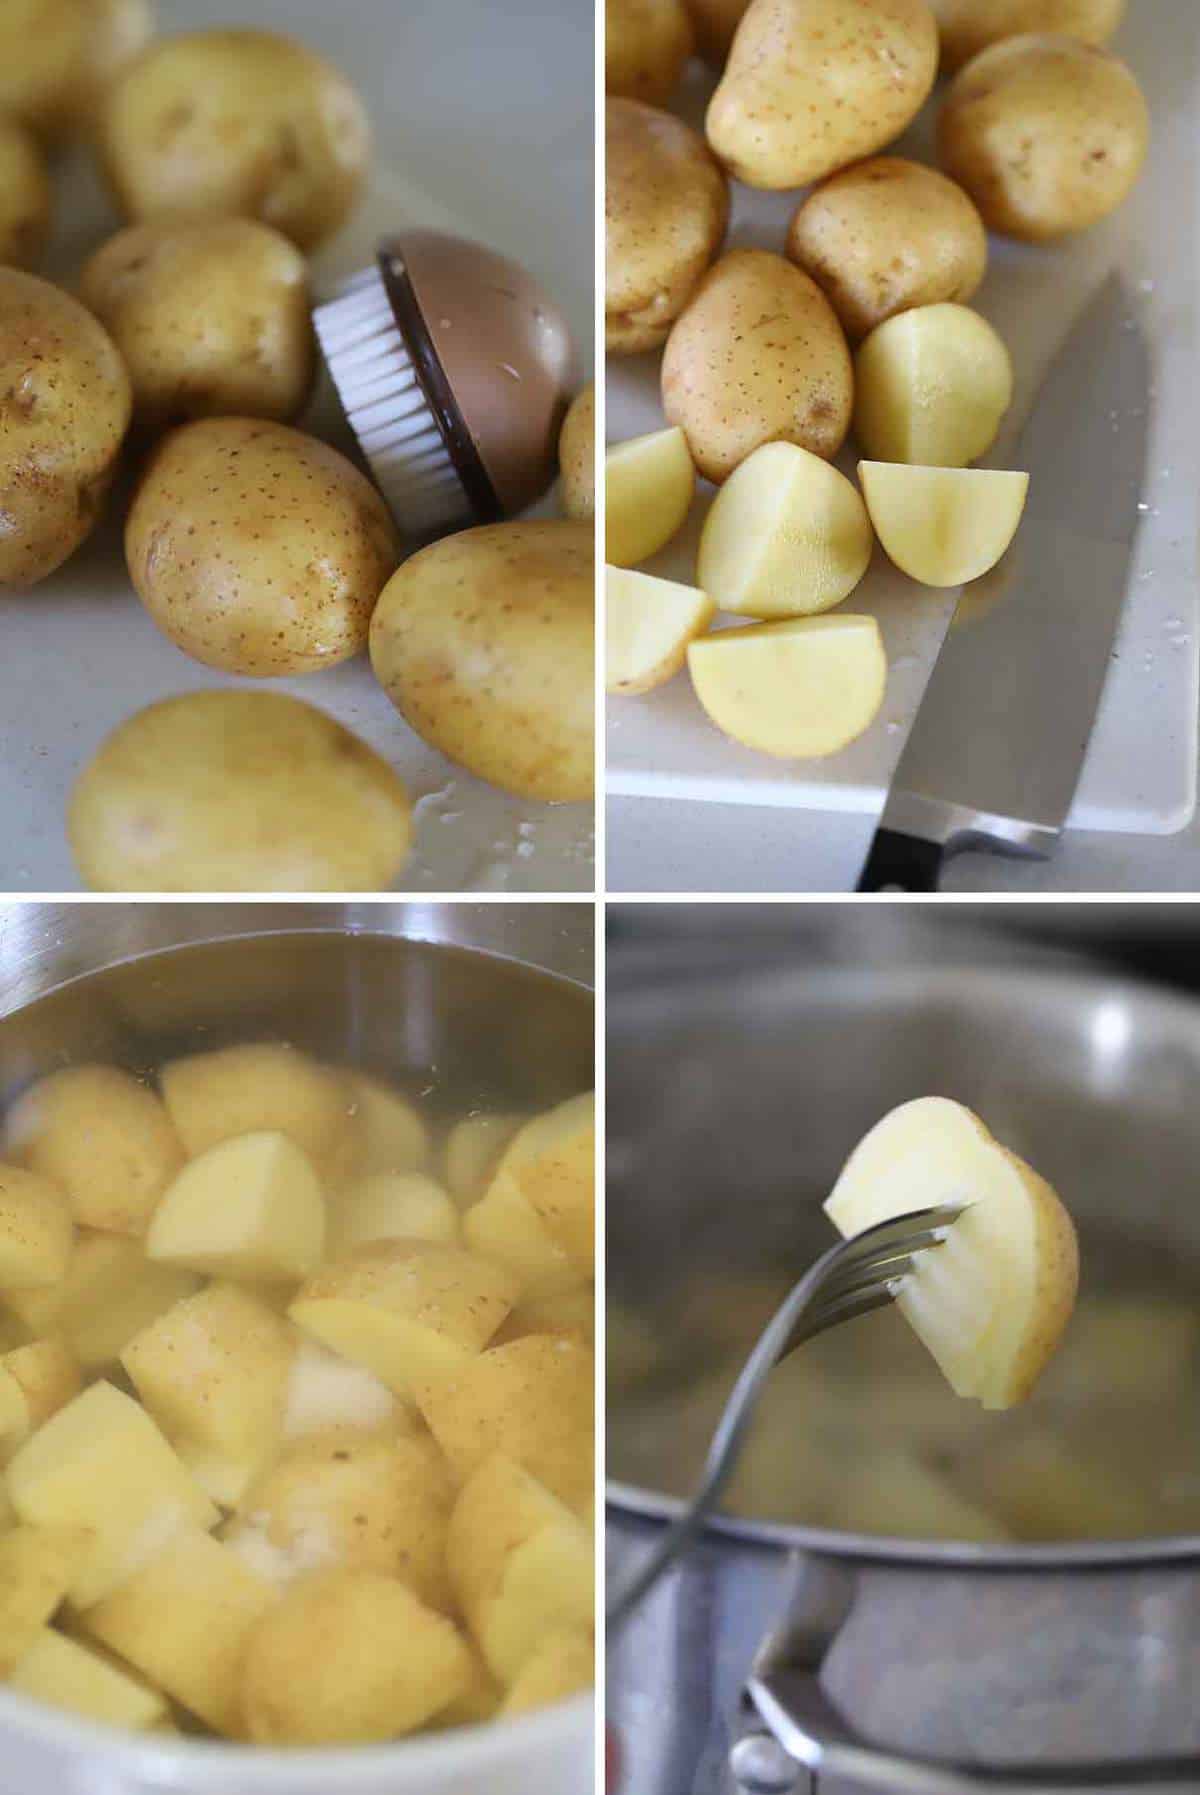 Washing and cutting yukon gold potatoes and boiling them in salted water.